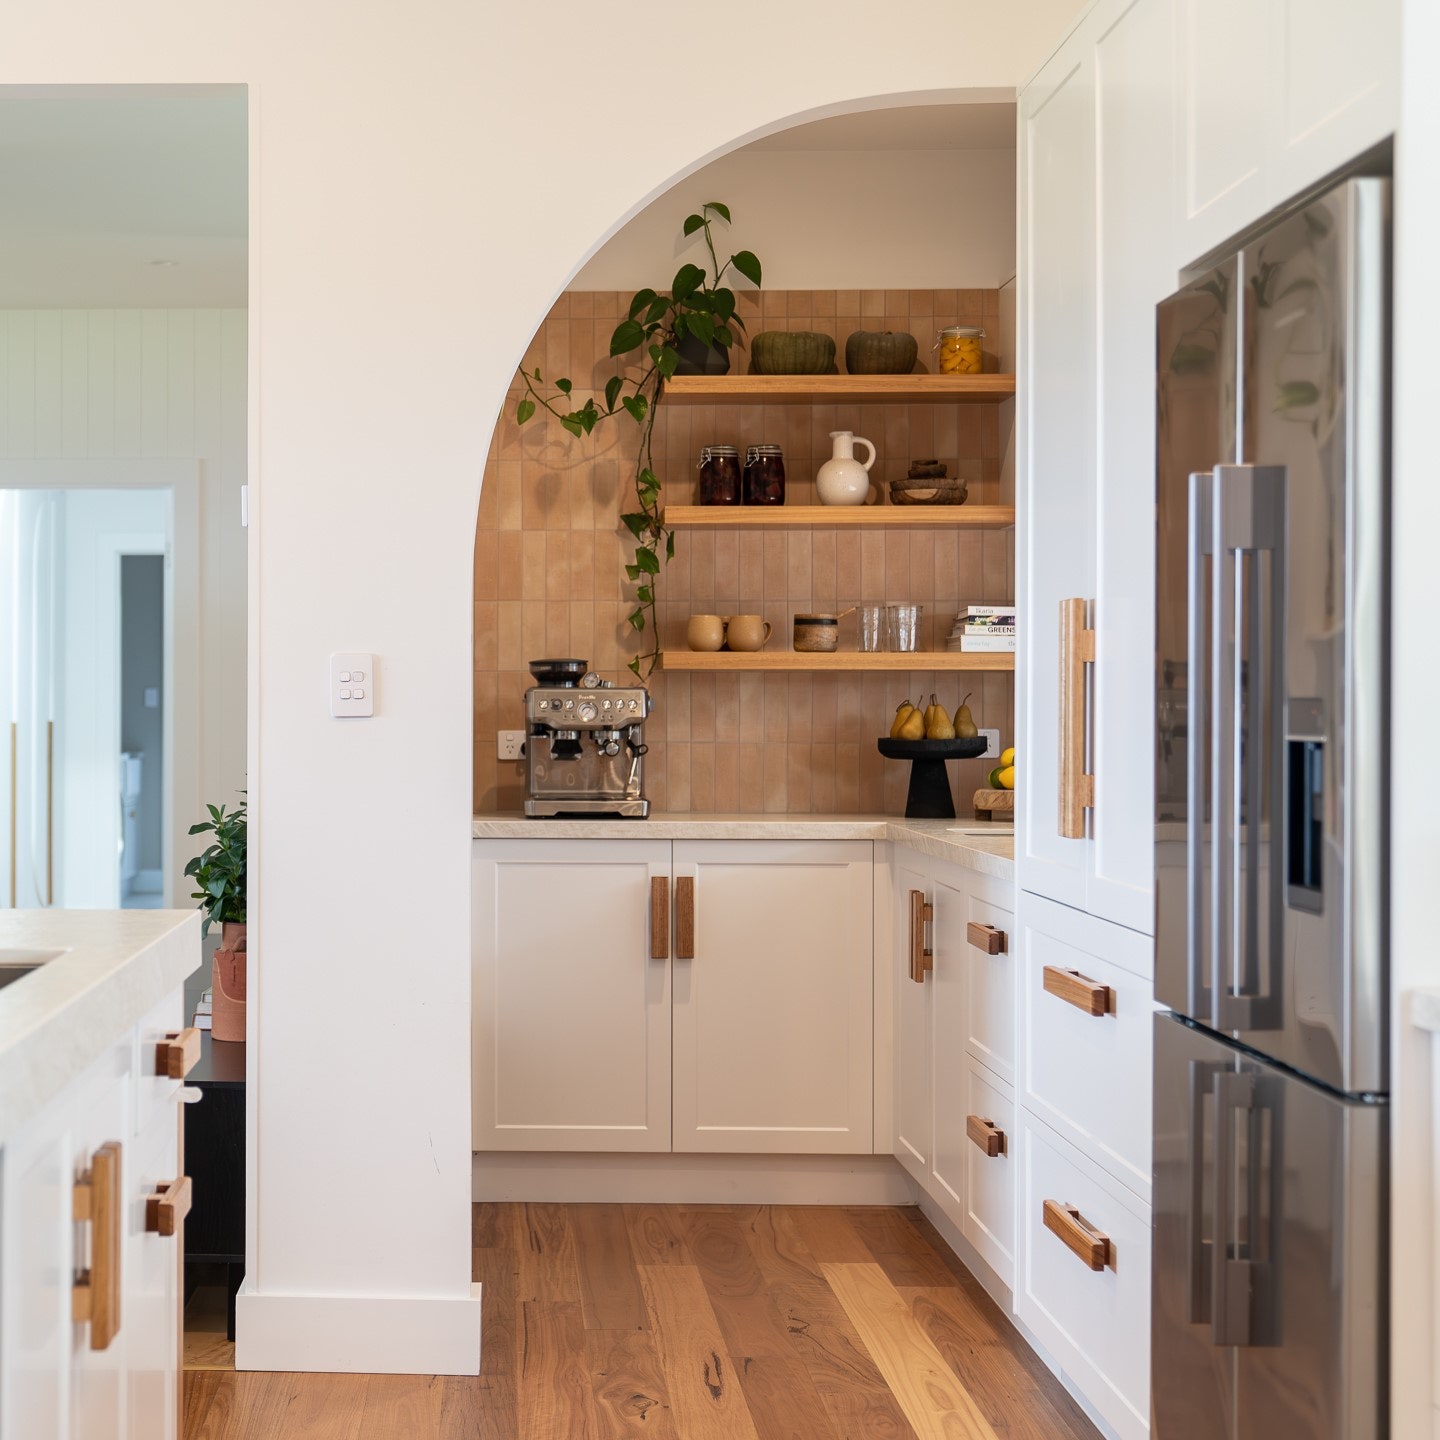 12 Small Pantry Ideas to Make the Most Out of Tight Spaces